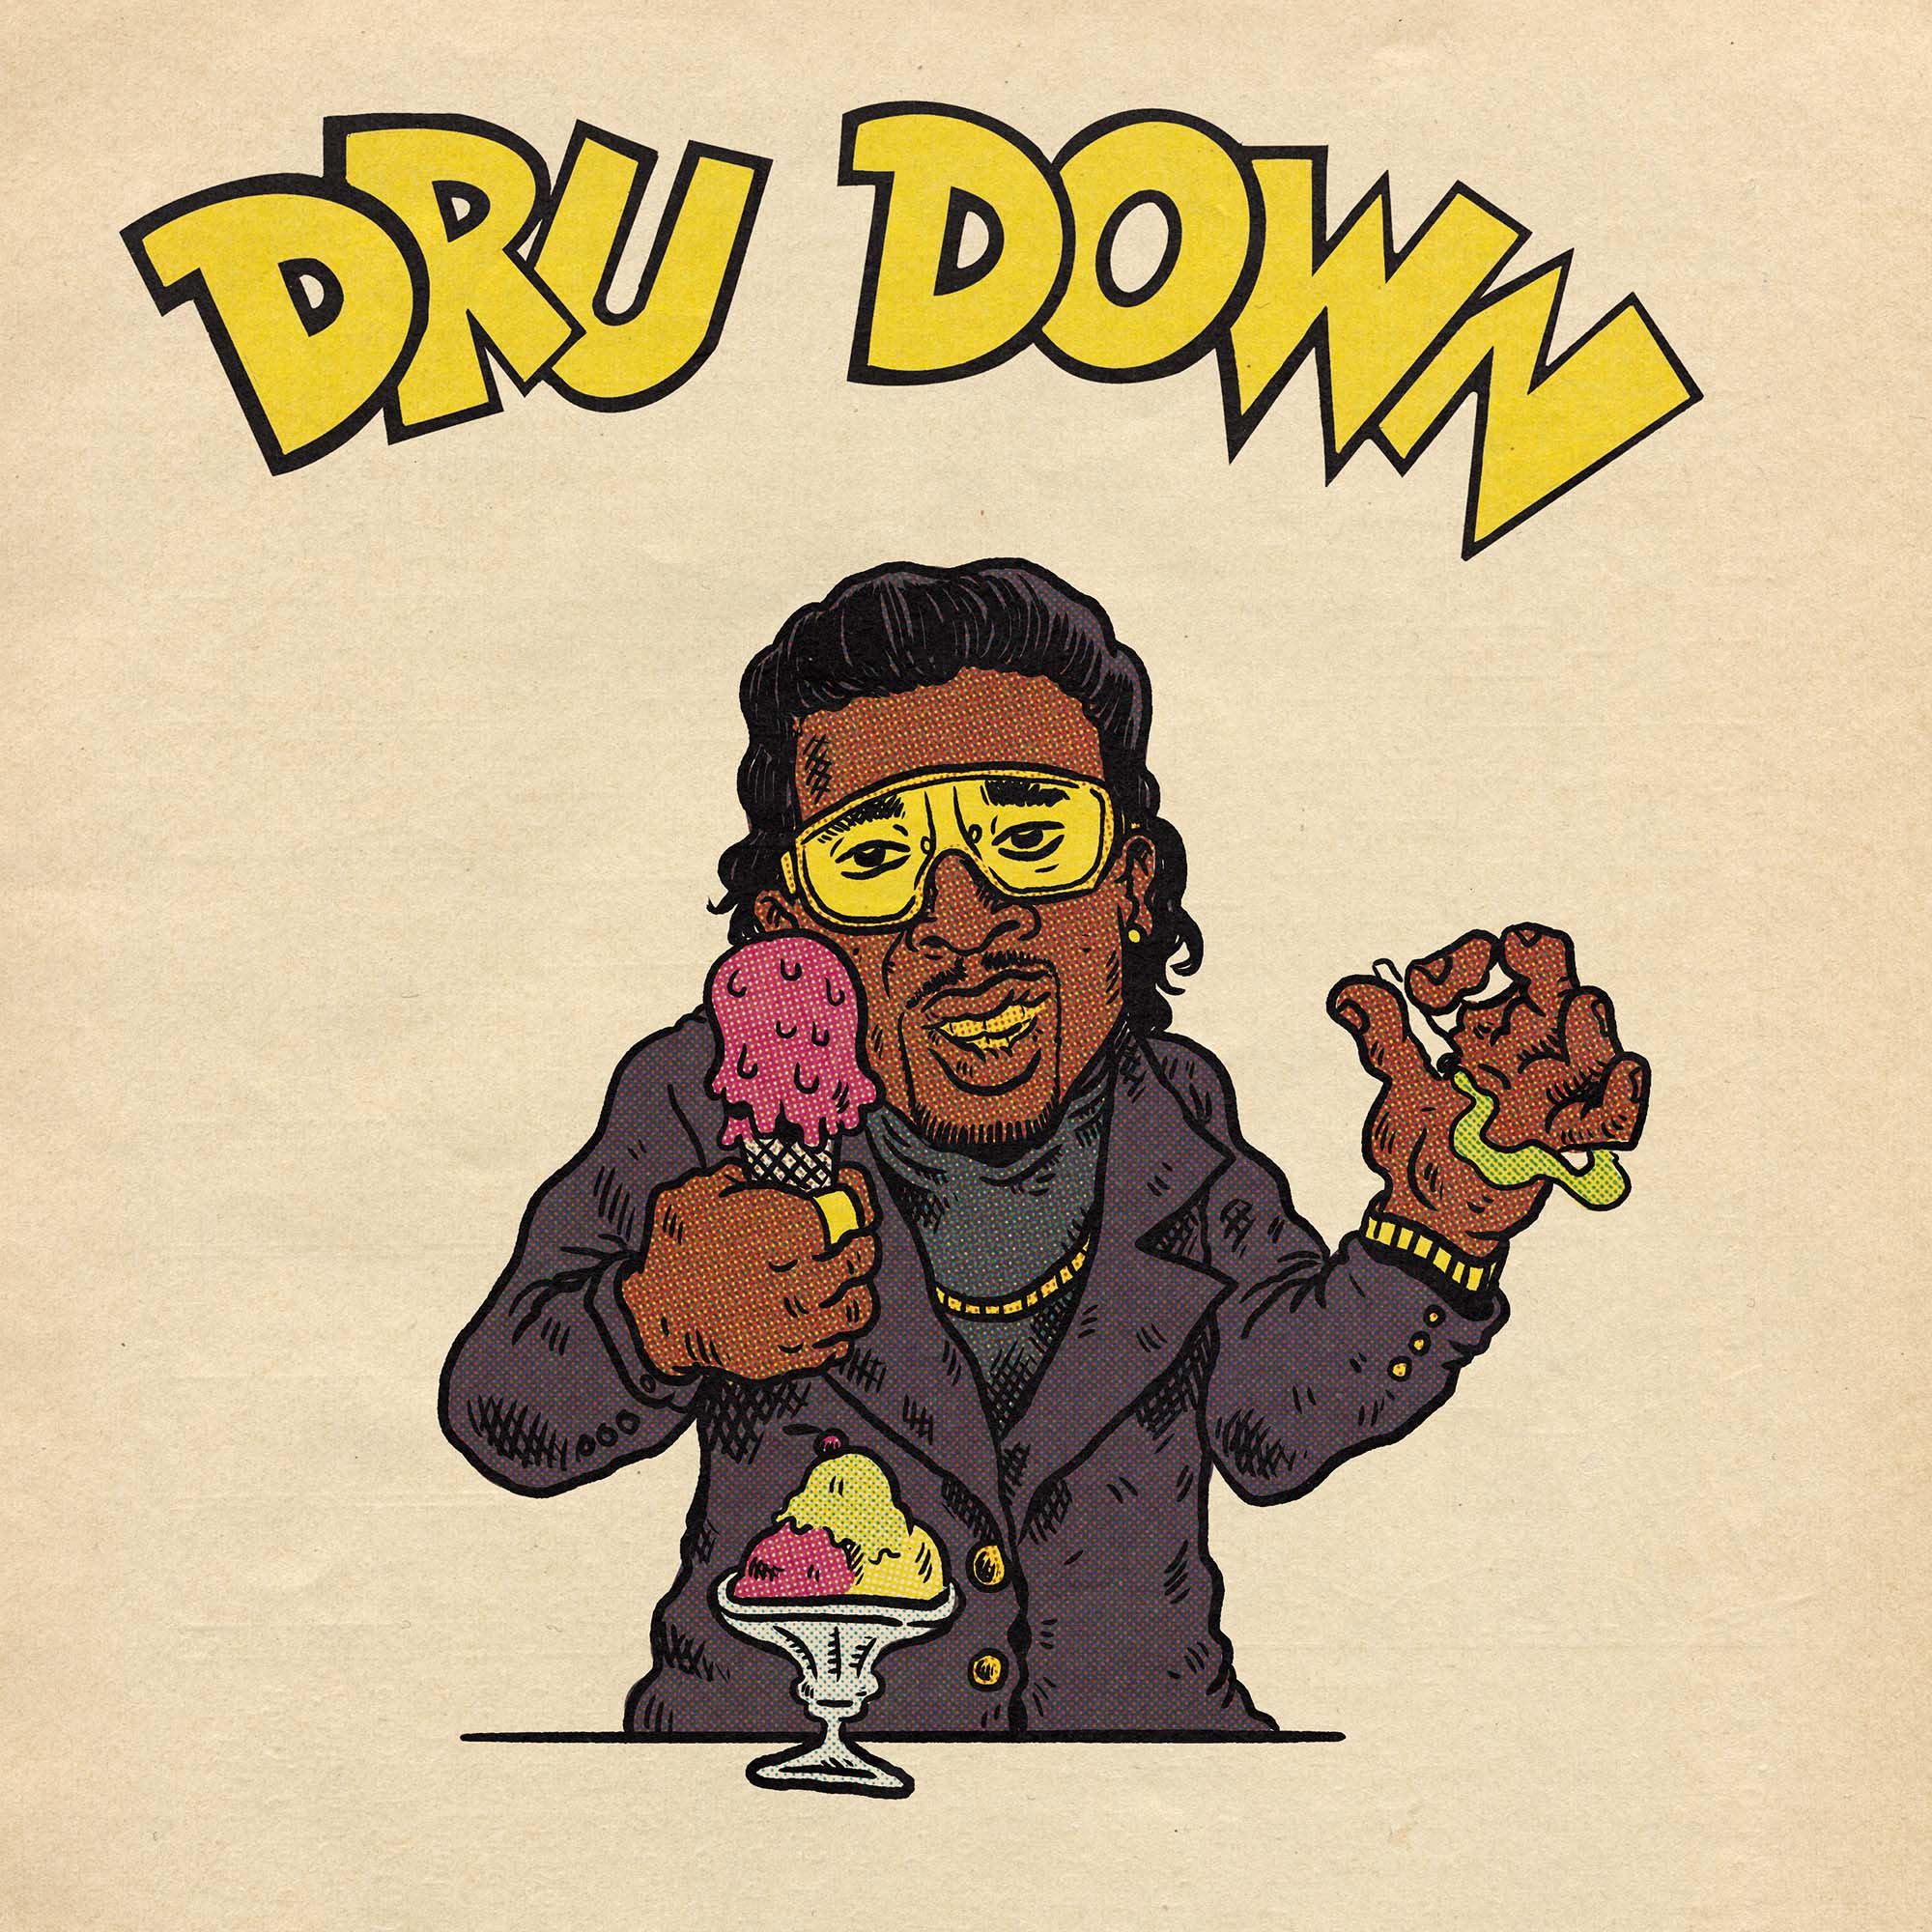 Illustration of the rapper Dru Down in gold sunglasses and a black trench coat, holding an ice cream cone in one hand and an ice cream sundae on the table in front of him.